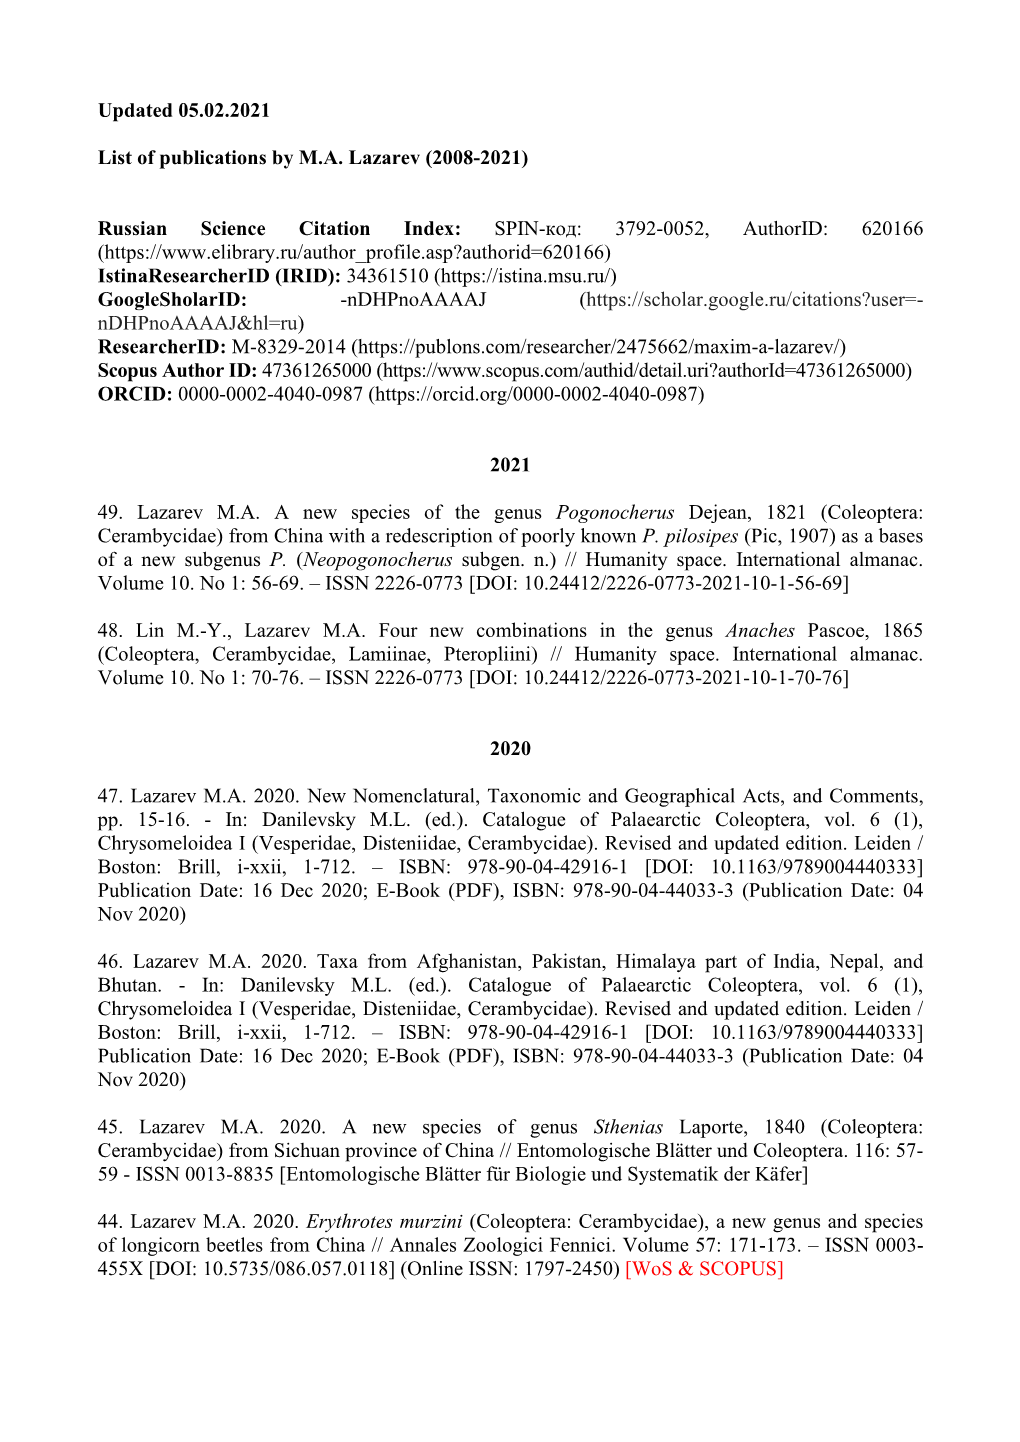 List of Publications by M.A. Lazarev (2008-2021)